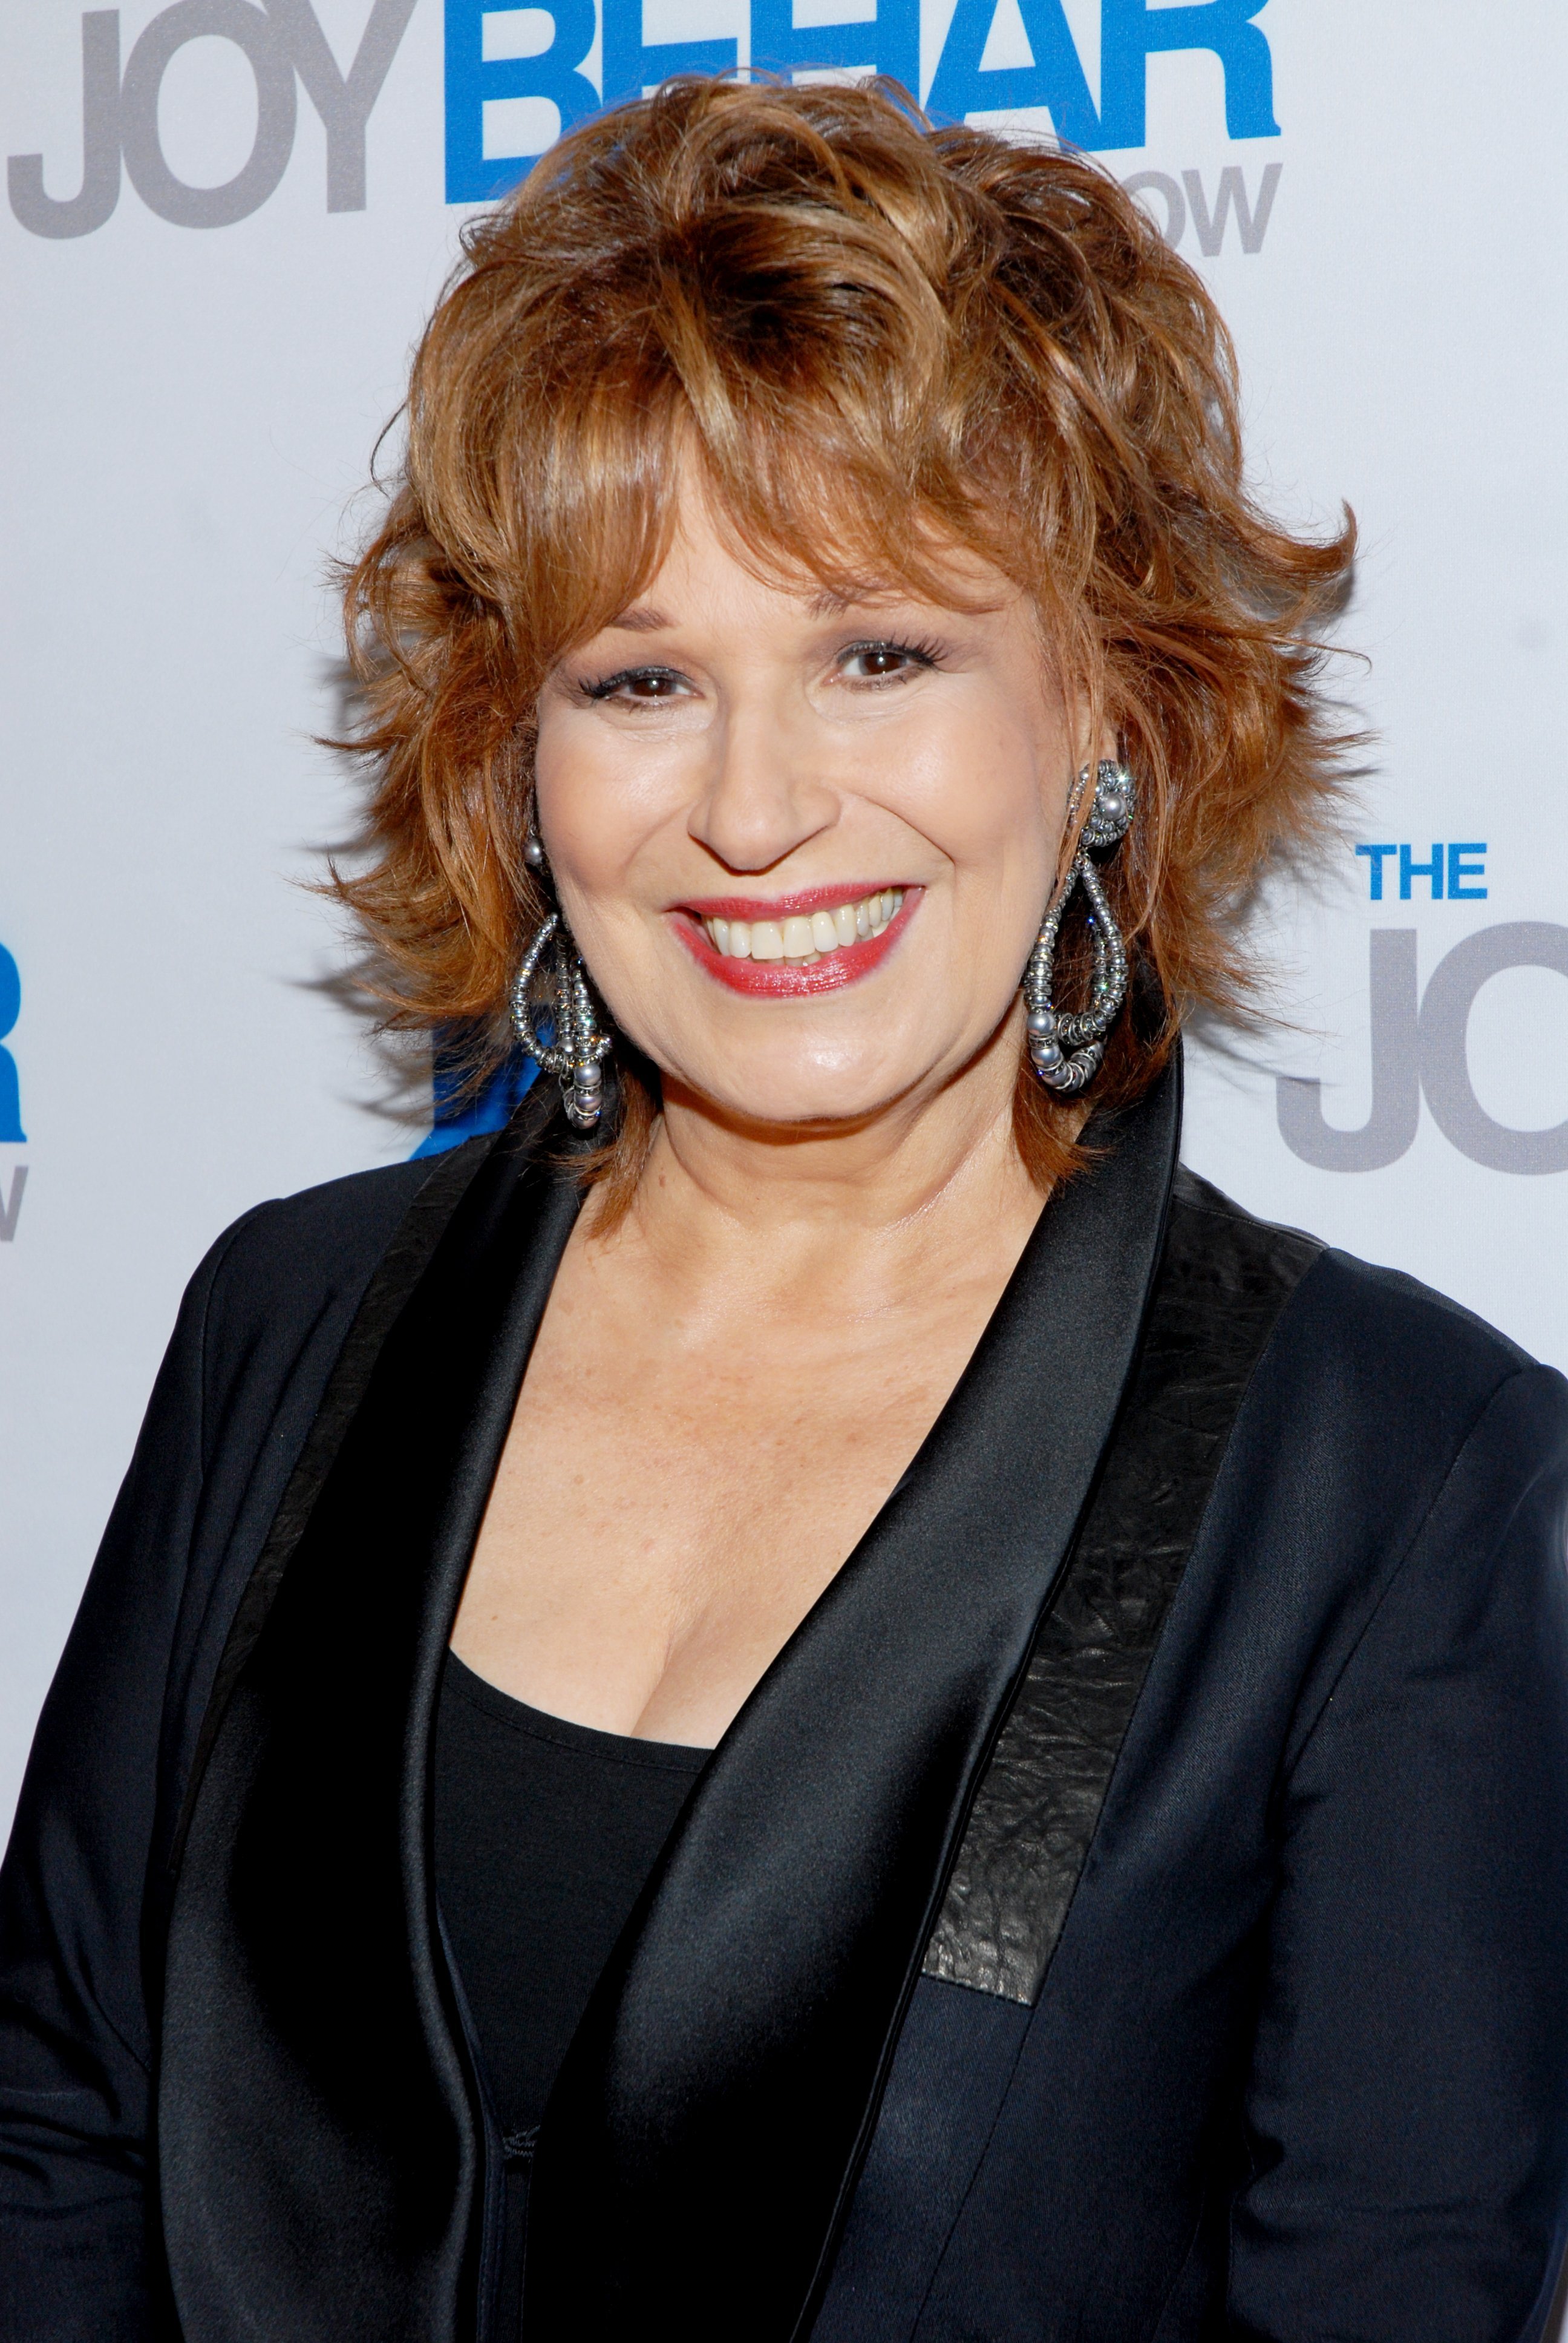 Joy Behar attends "The Joy Behar Show" launch party in New York City on September 23, 2009 | Photo: Getty Images